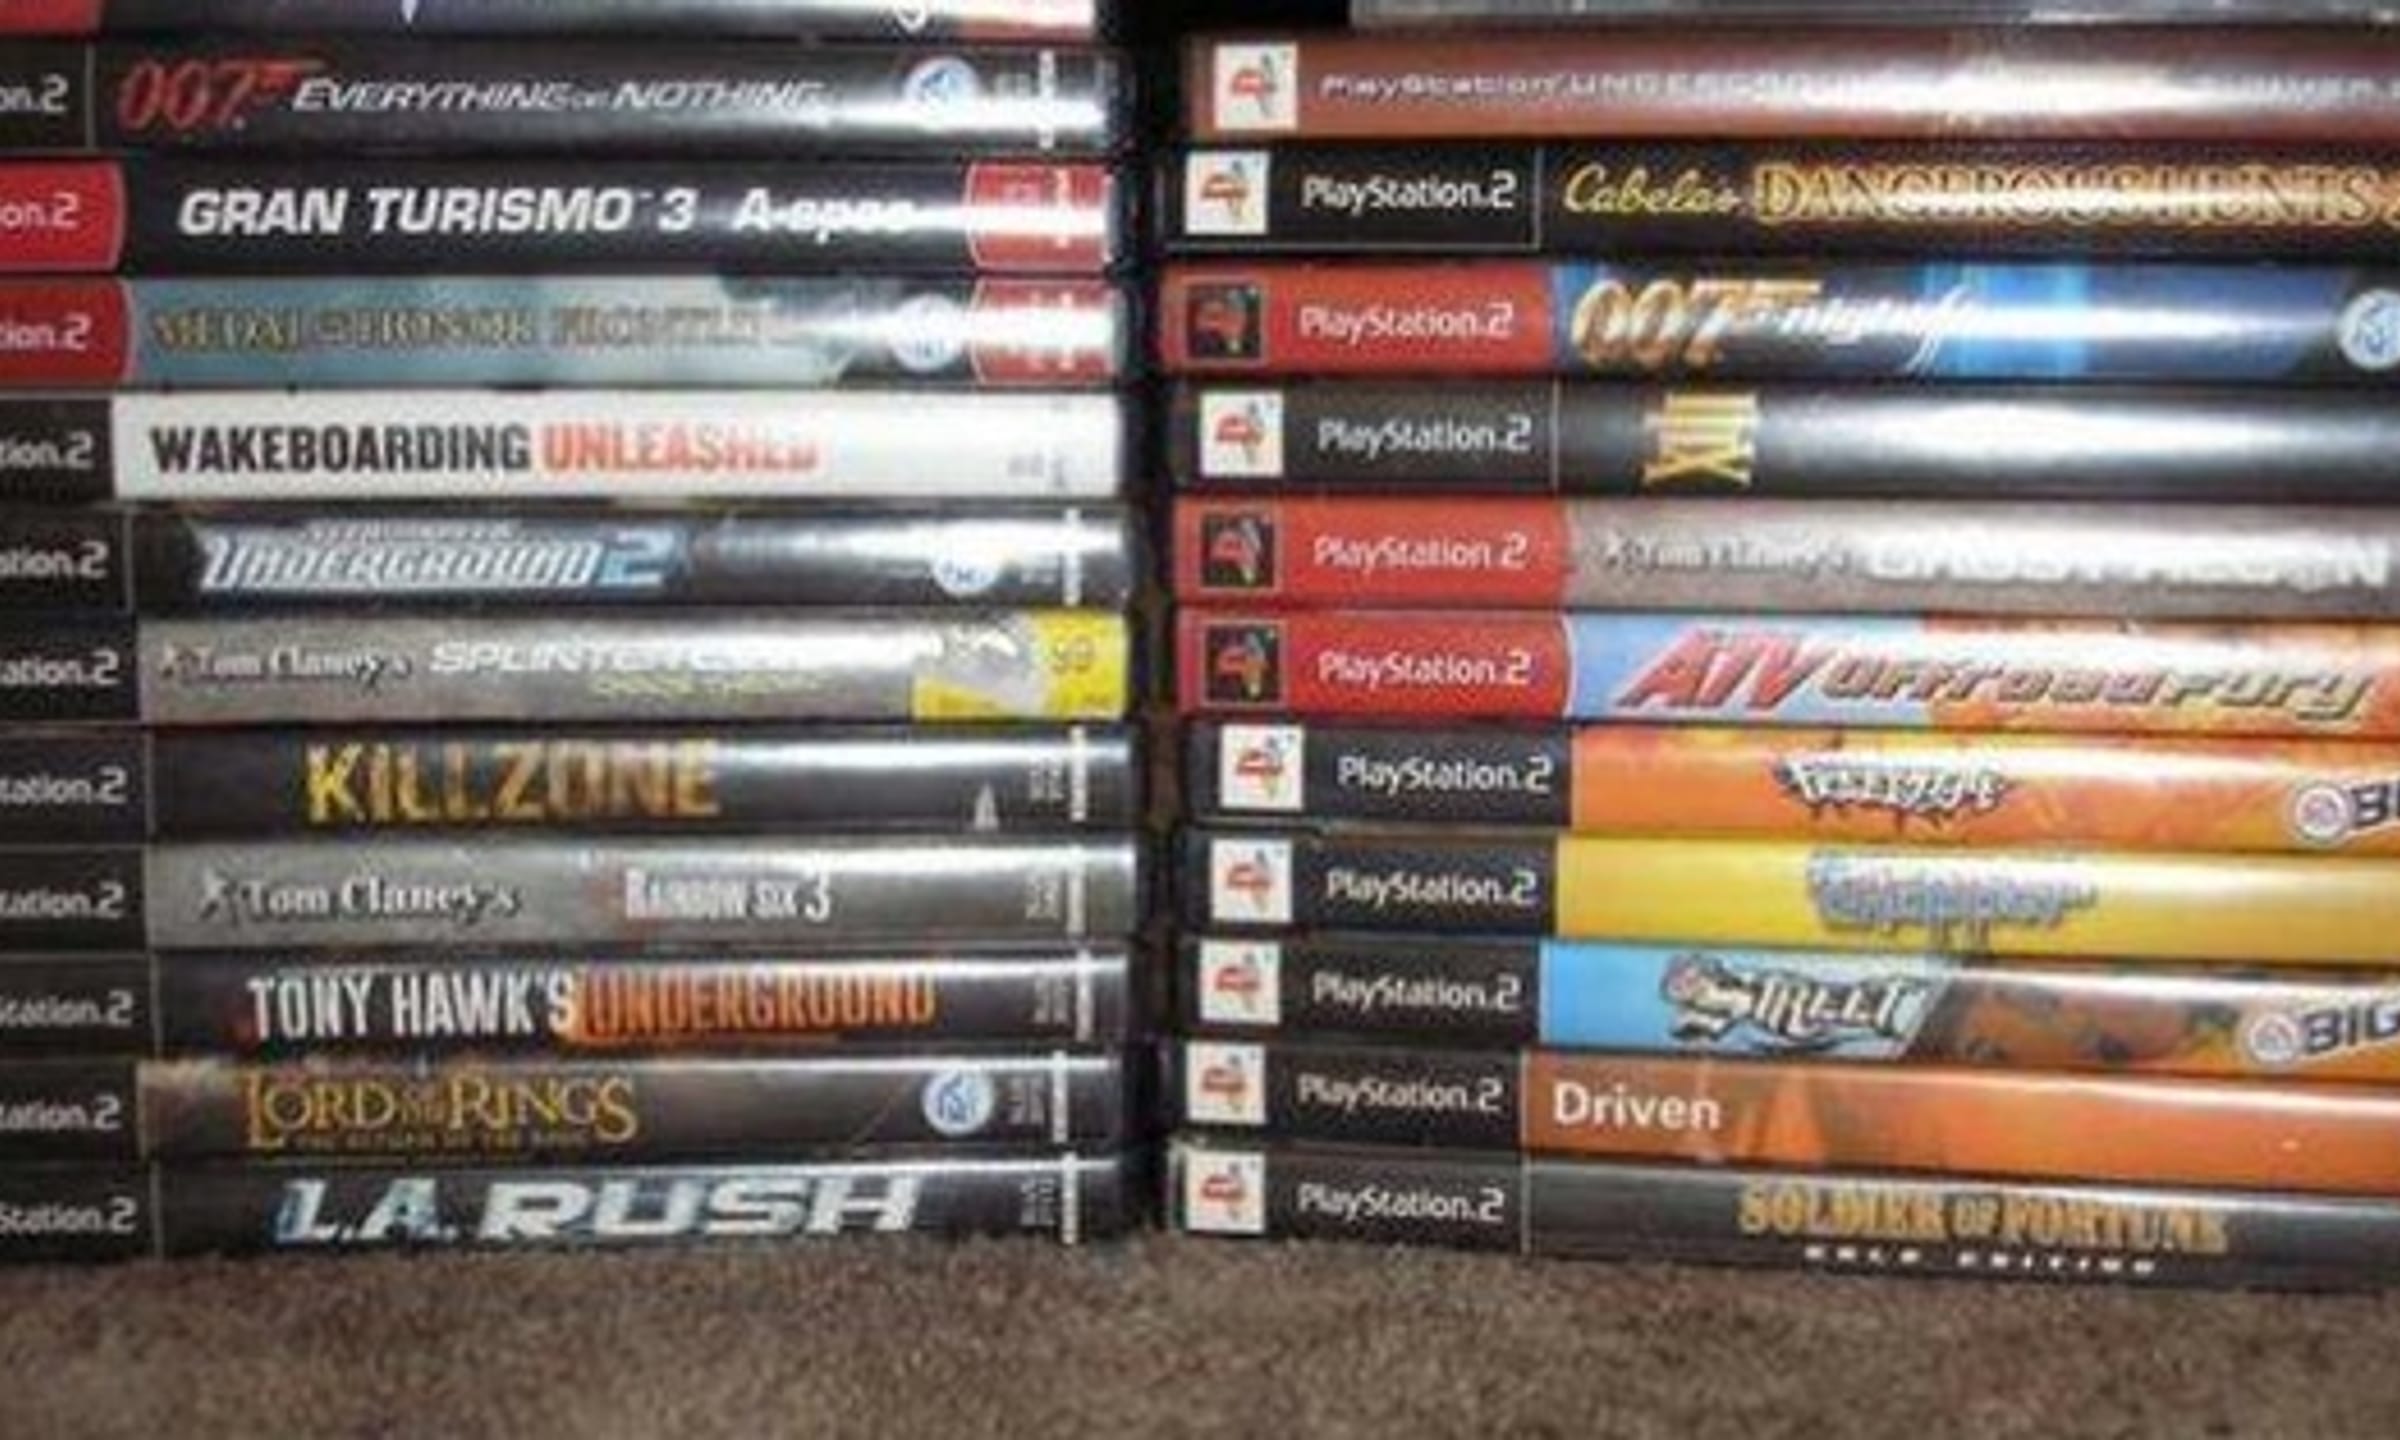 Sony PlayStation 2 Games: List of PS2 Console Games